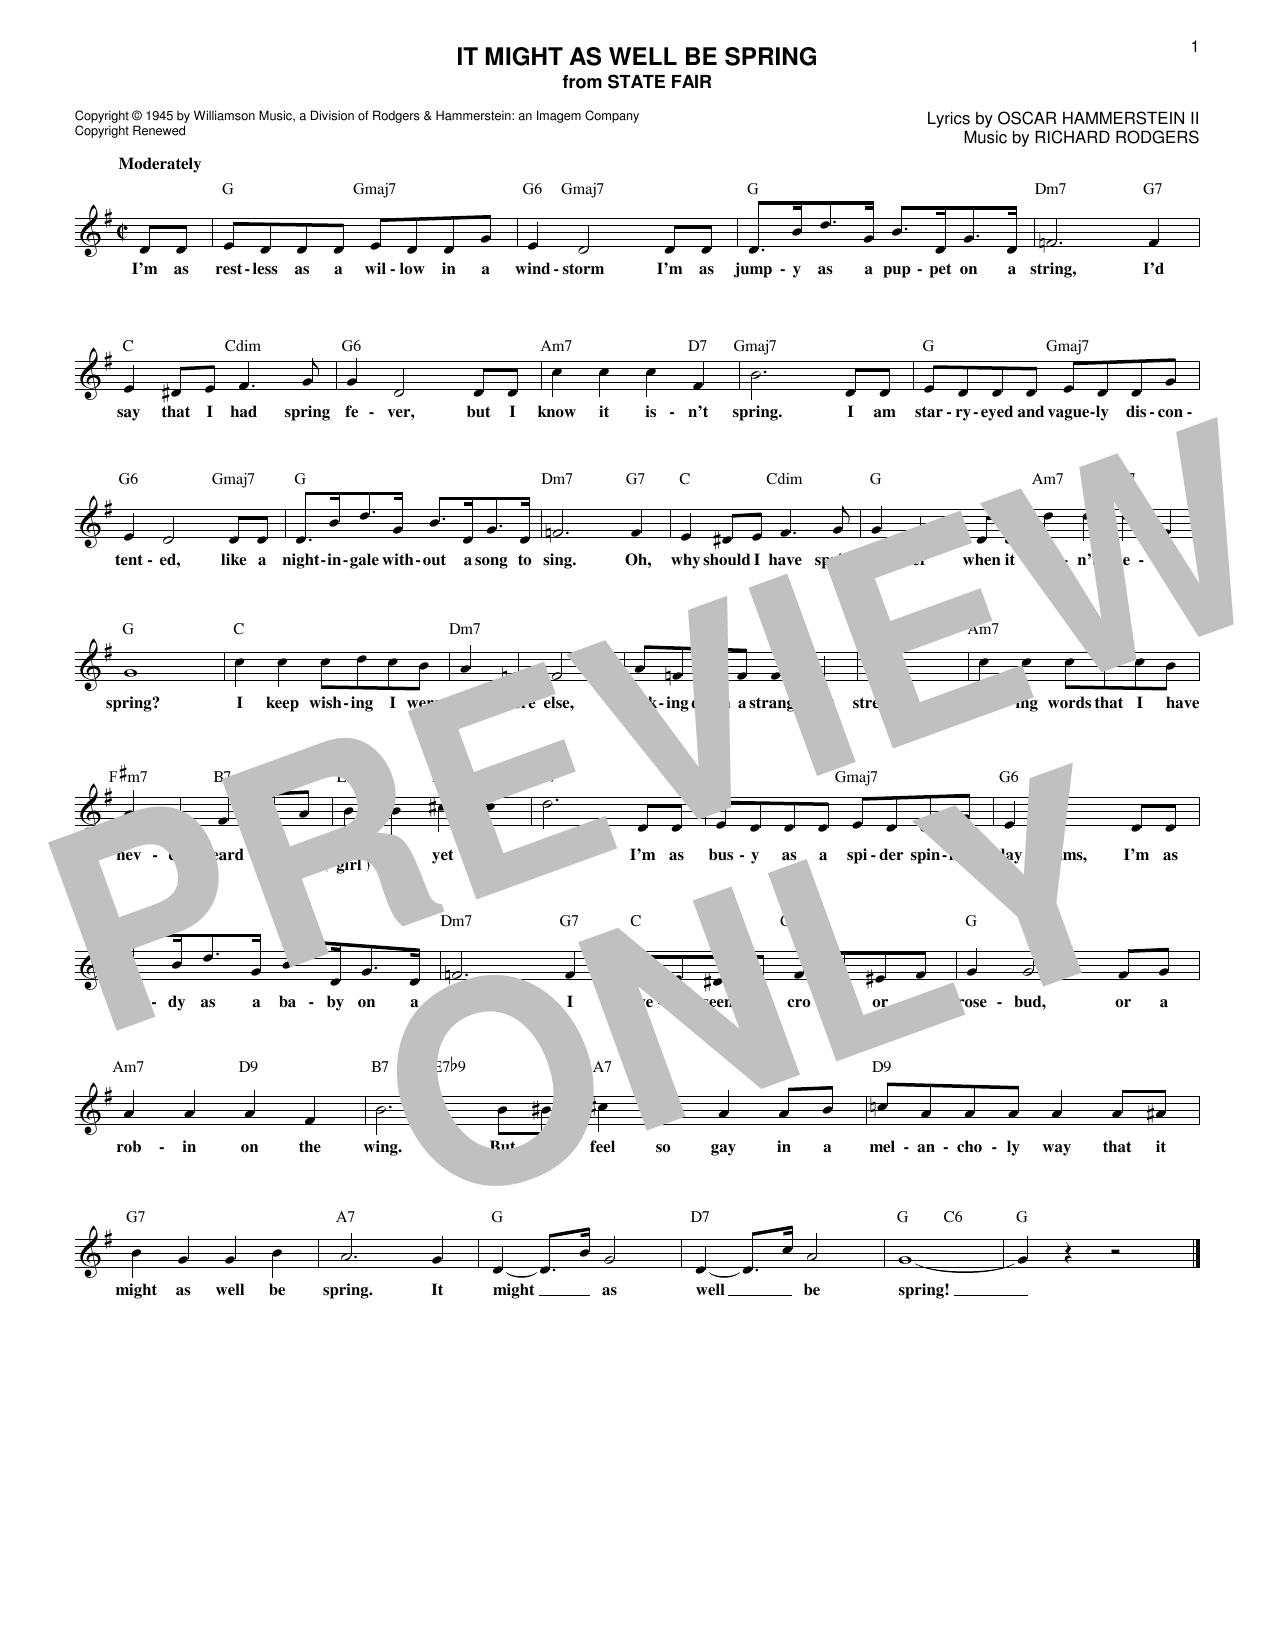 Download Rodgers & Hammerstein It Might As Well Be Spring Sheet Music